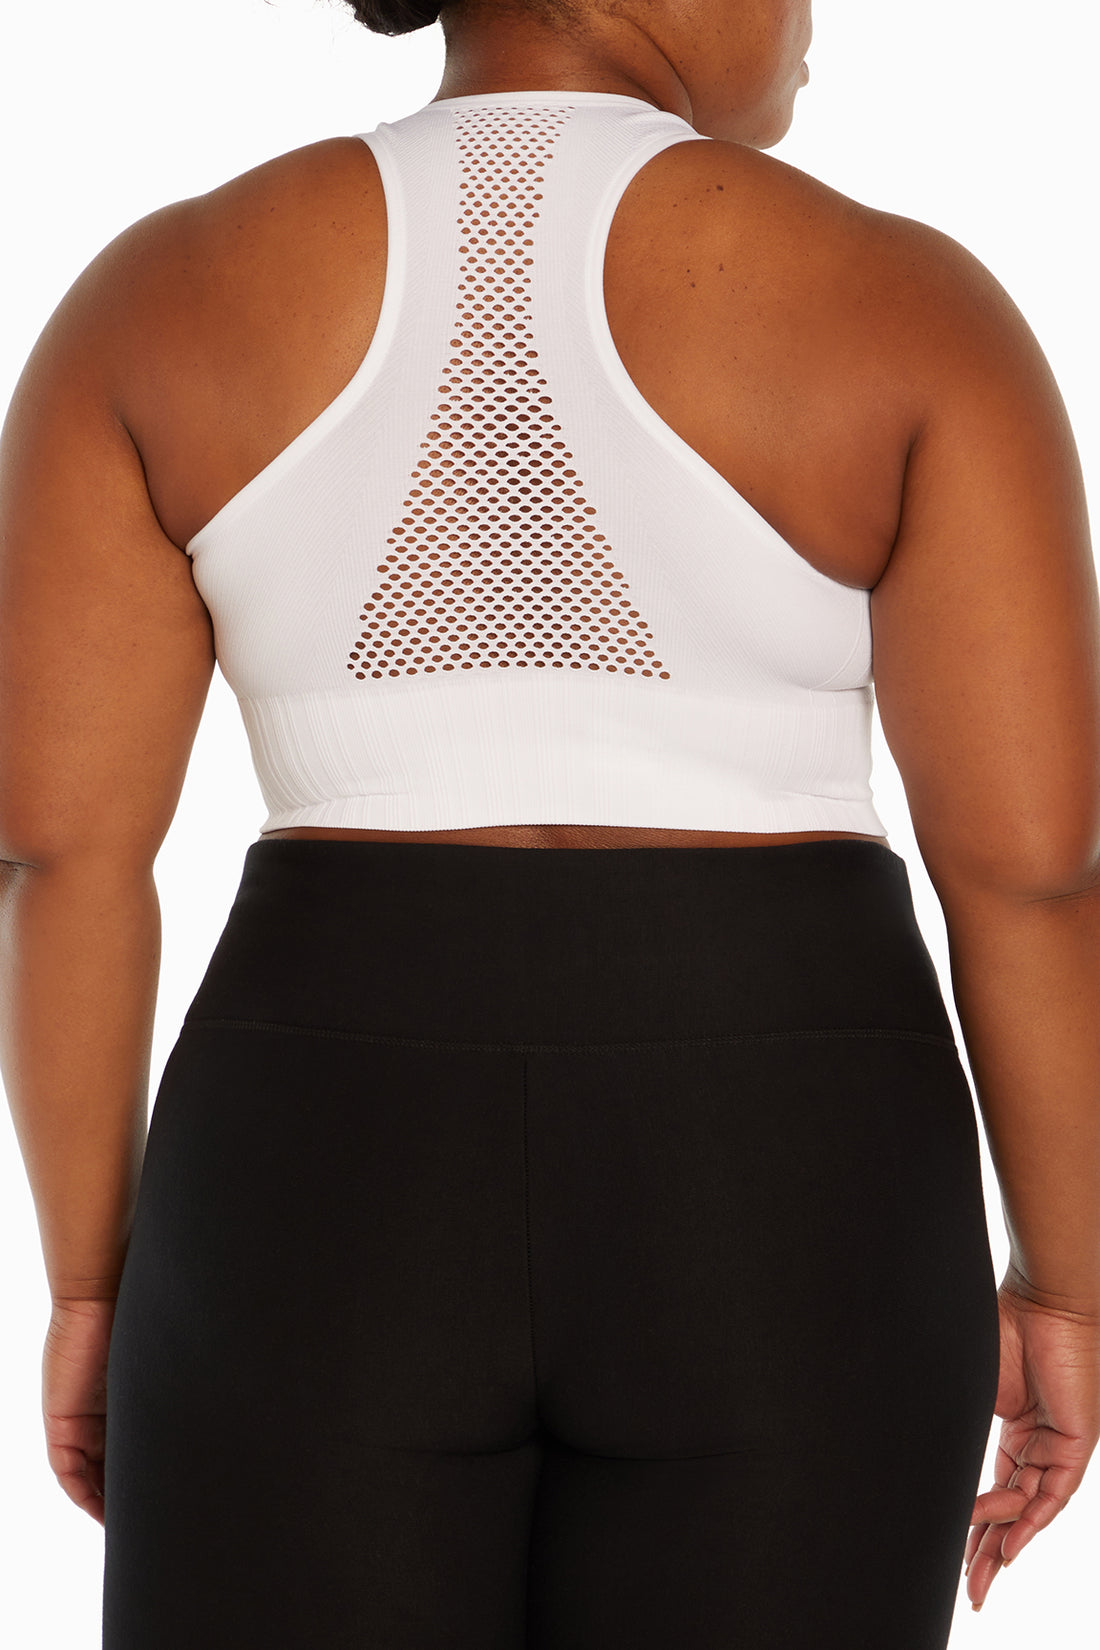 The Balance Collection by Marika Plus-Sized Clothing On Sale Up To 90% Off  Retail